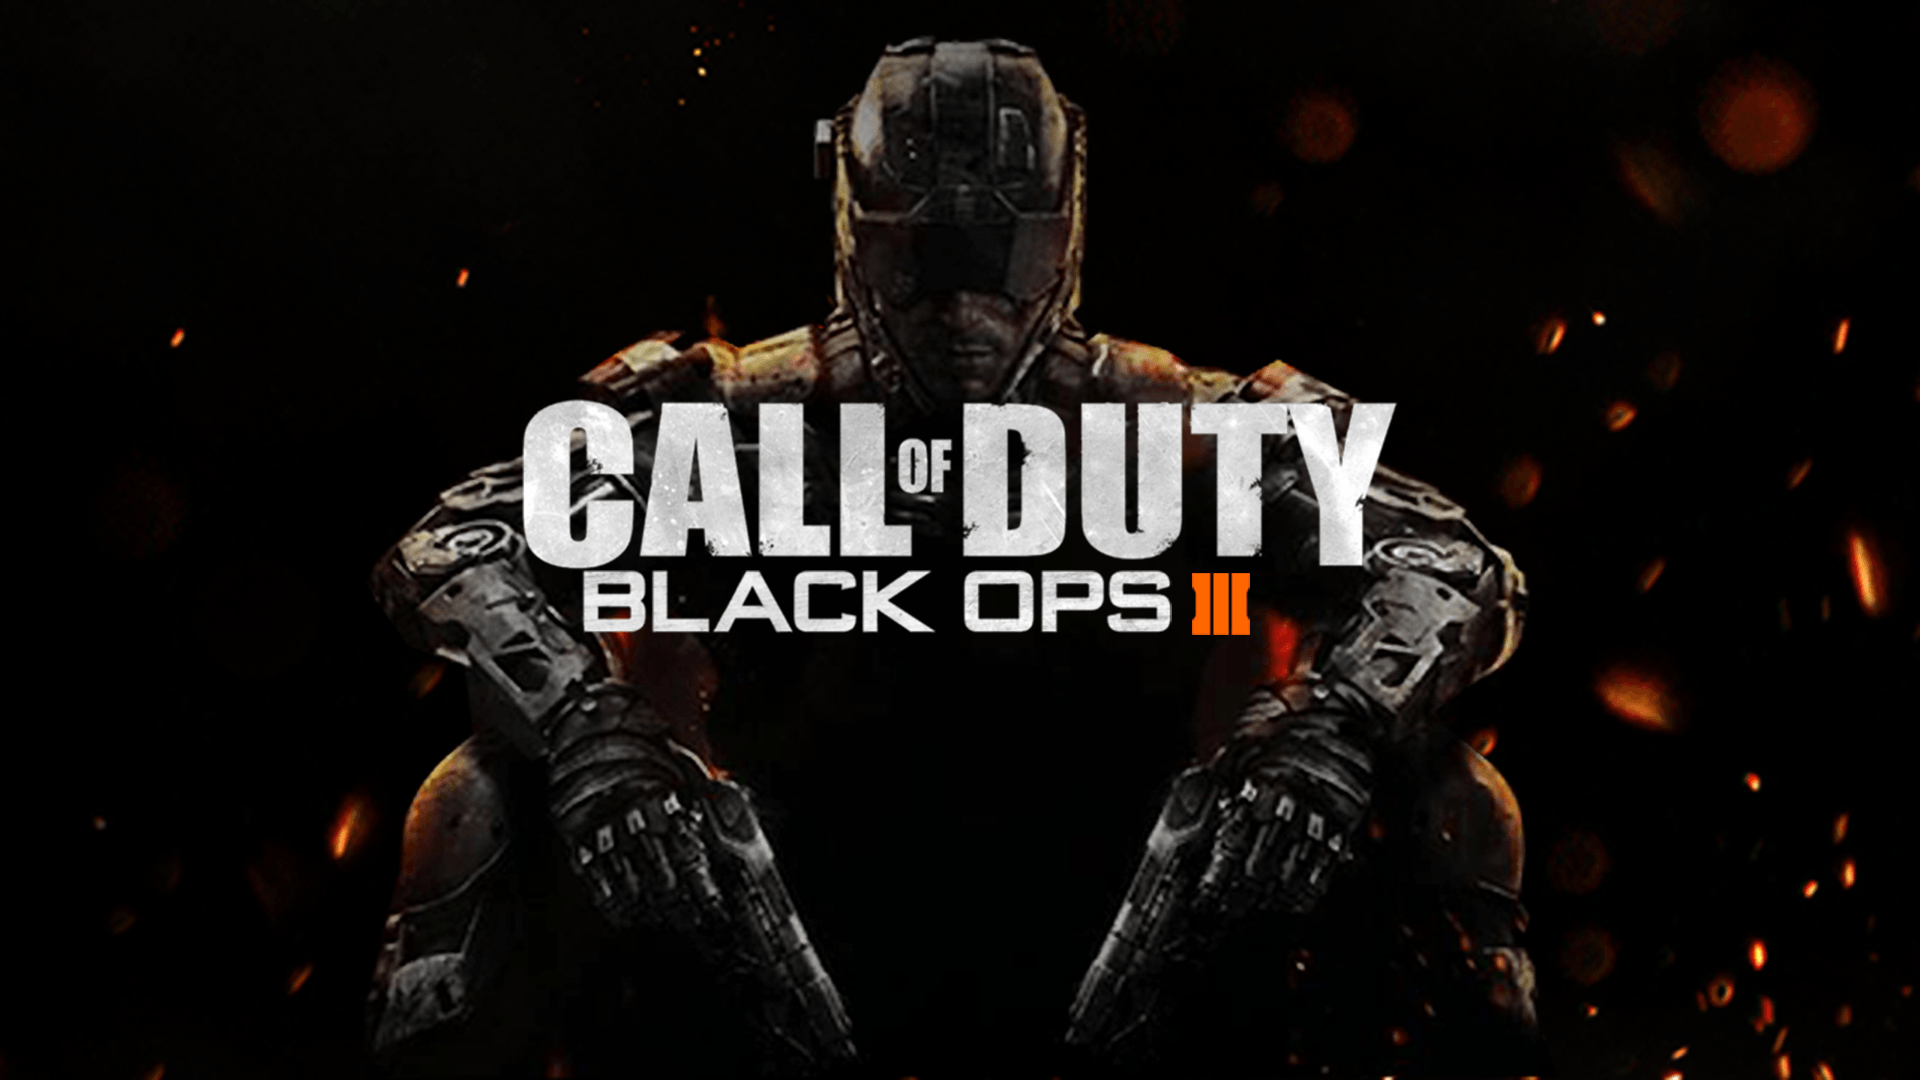 call-of-duty-black-ops-3-free-download-pc-game-full-version-games